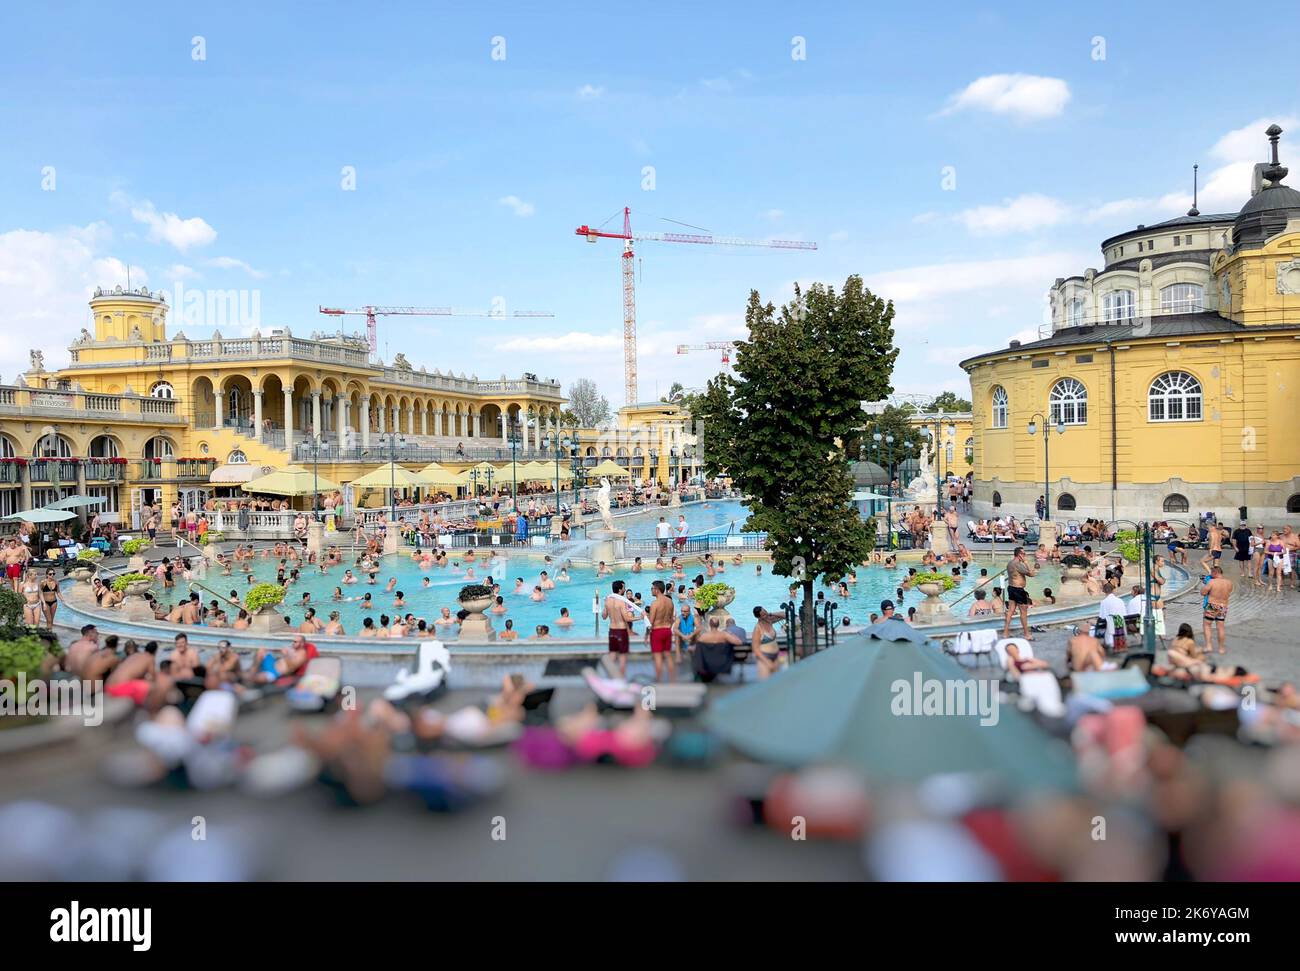 Panoramic view of Thermal Baths and Spa (called The Széchenyi Medicinal Bath) at Budapest, Hungary Stock Photo